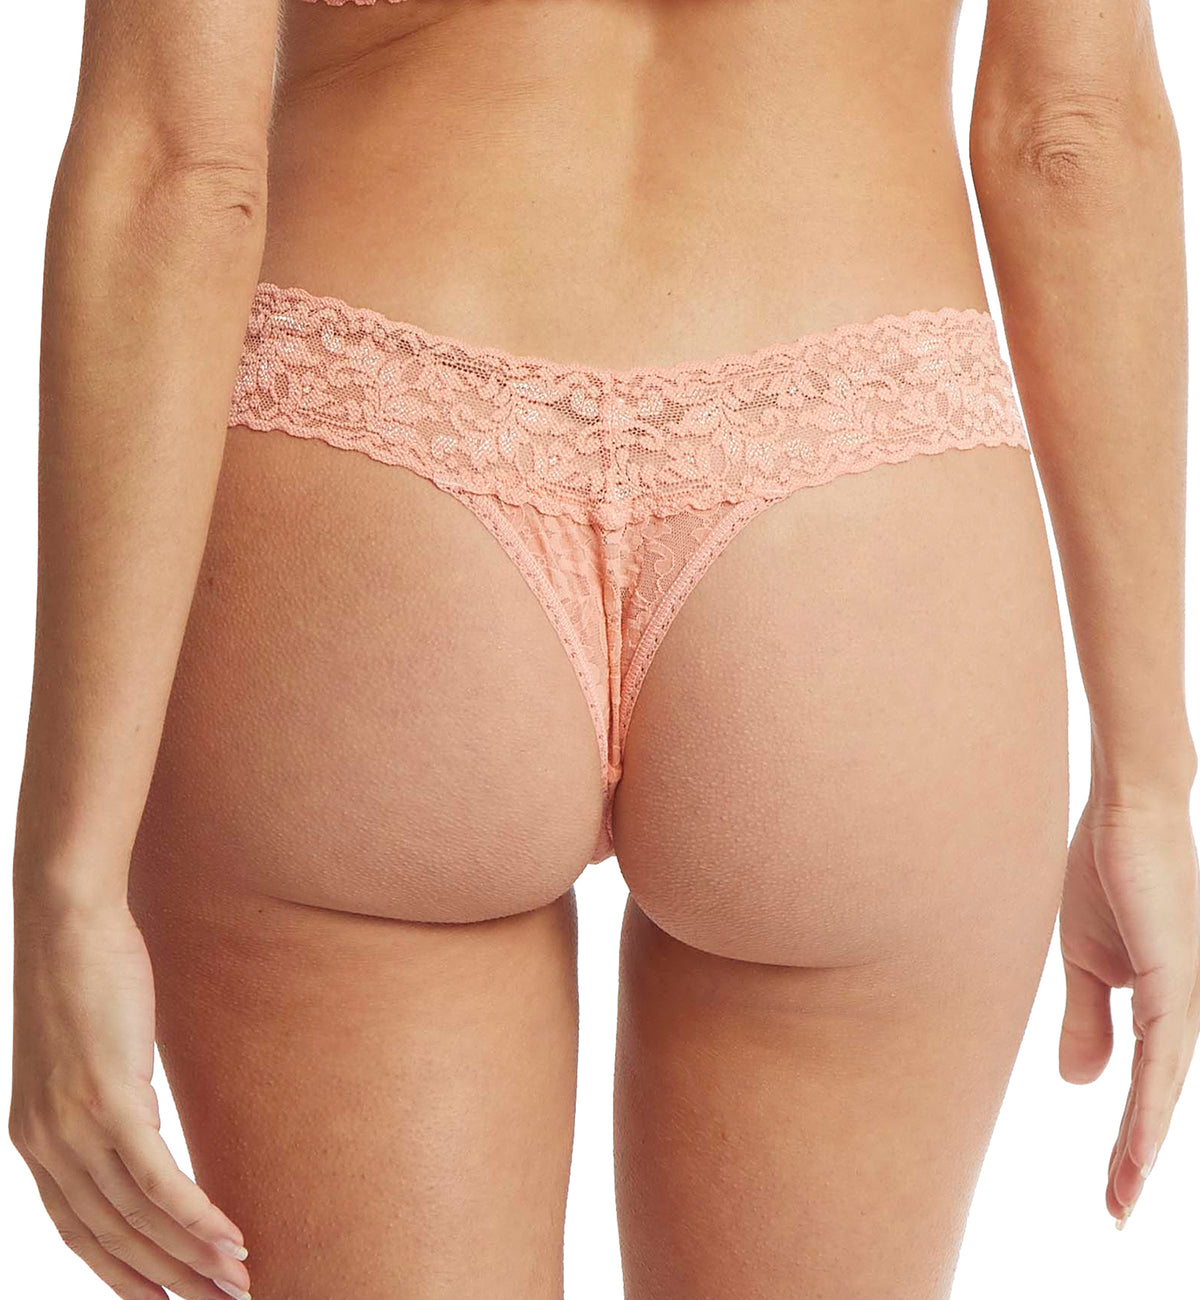 Hanky Panky Signature Lace Low Rise Thong (4911P),Snapdragon - Snapdragon,One Size